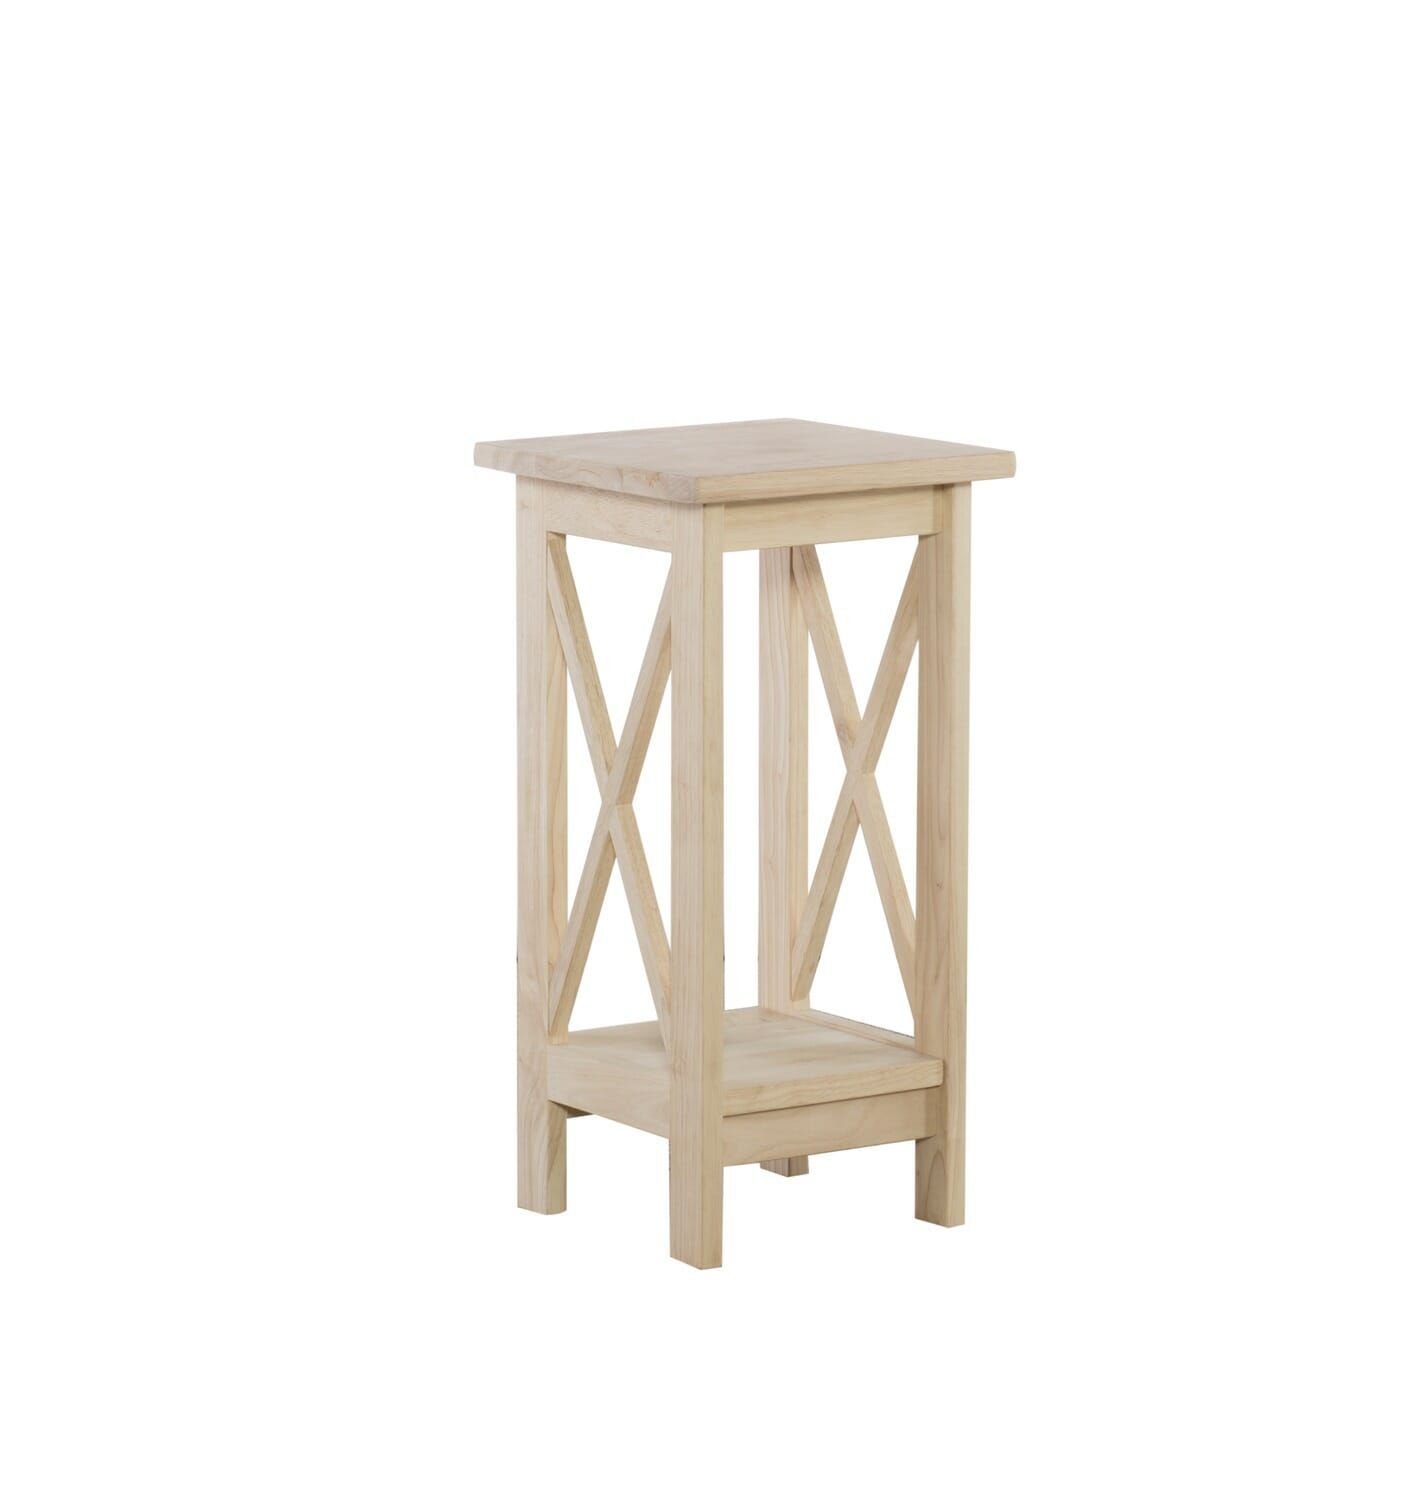 3071x 24 Inch Tall X Sided Plant Stand | Unfinished Furniture Of Wilmington Inside Unfinished Plant Stands (View 1 of 15)